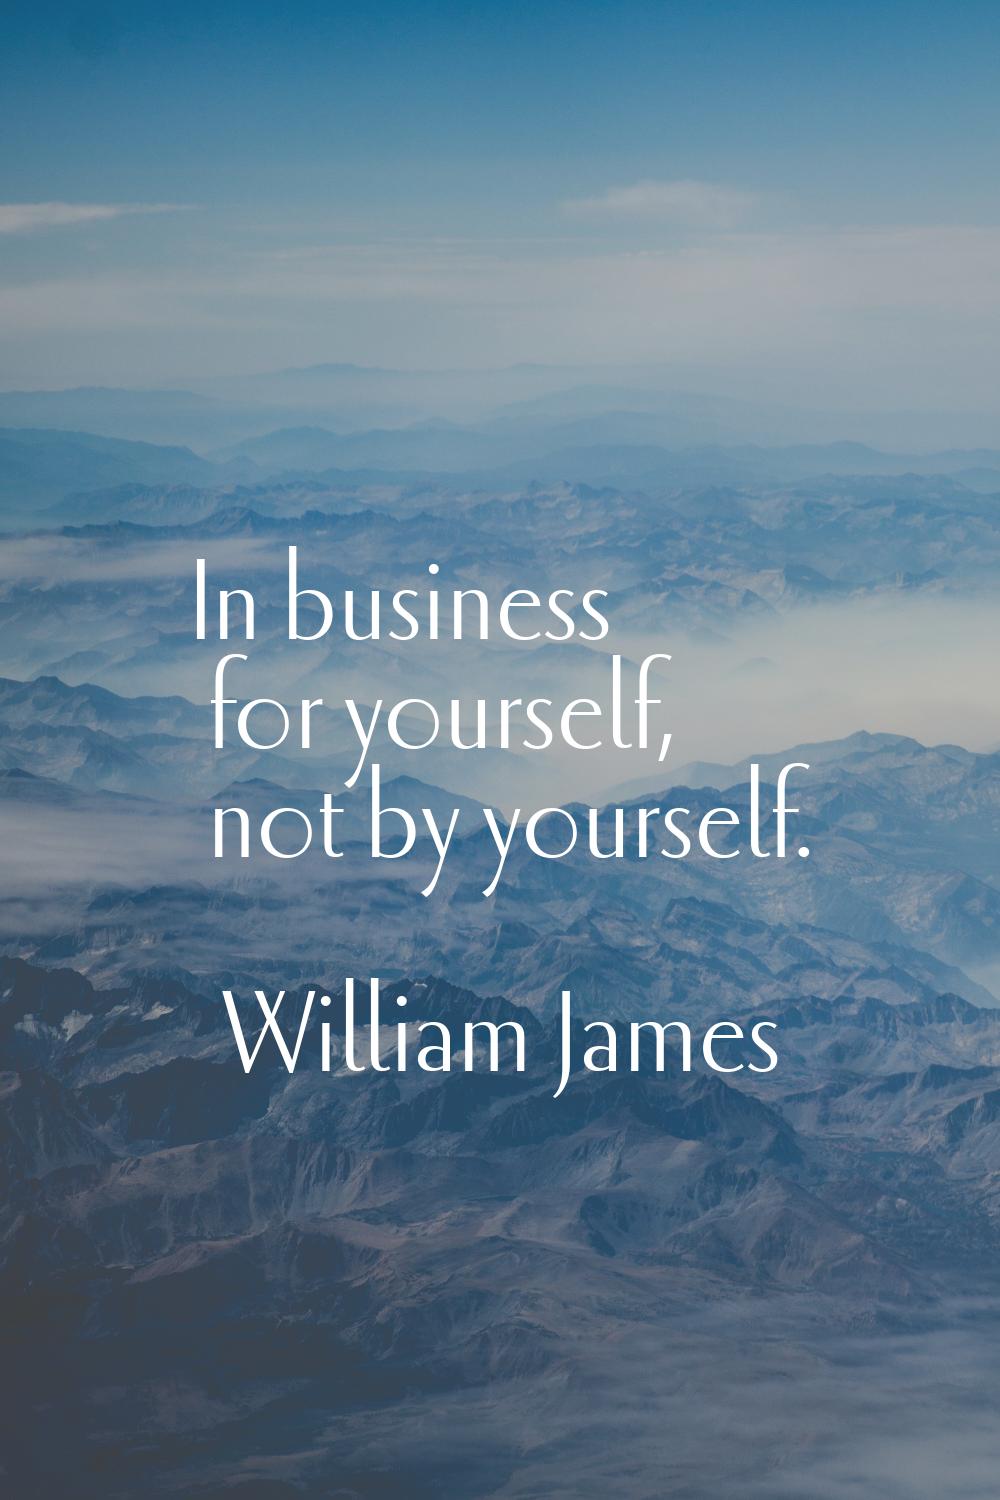 In business for yourself, not by yourself.